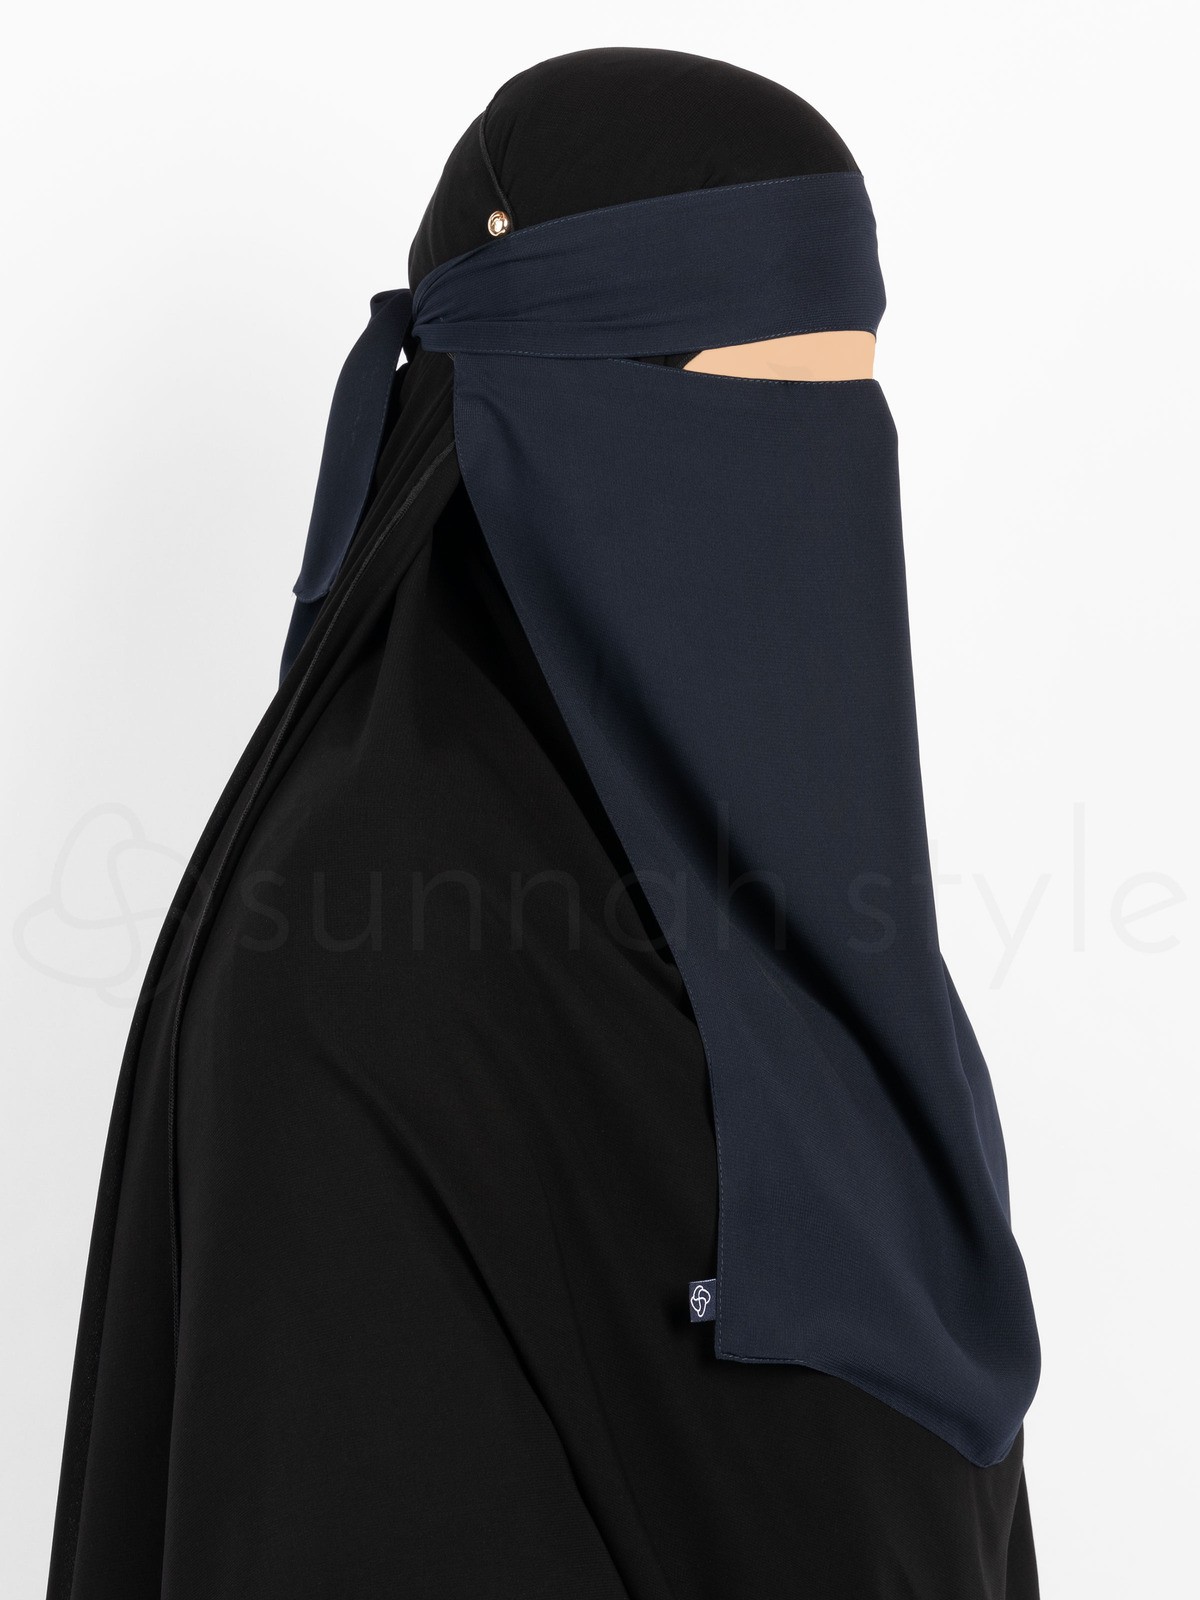 Sunnah Style - Pull-Down One Layer Niqab (Navy Blue)